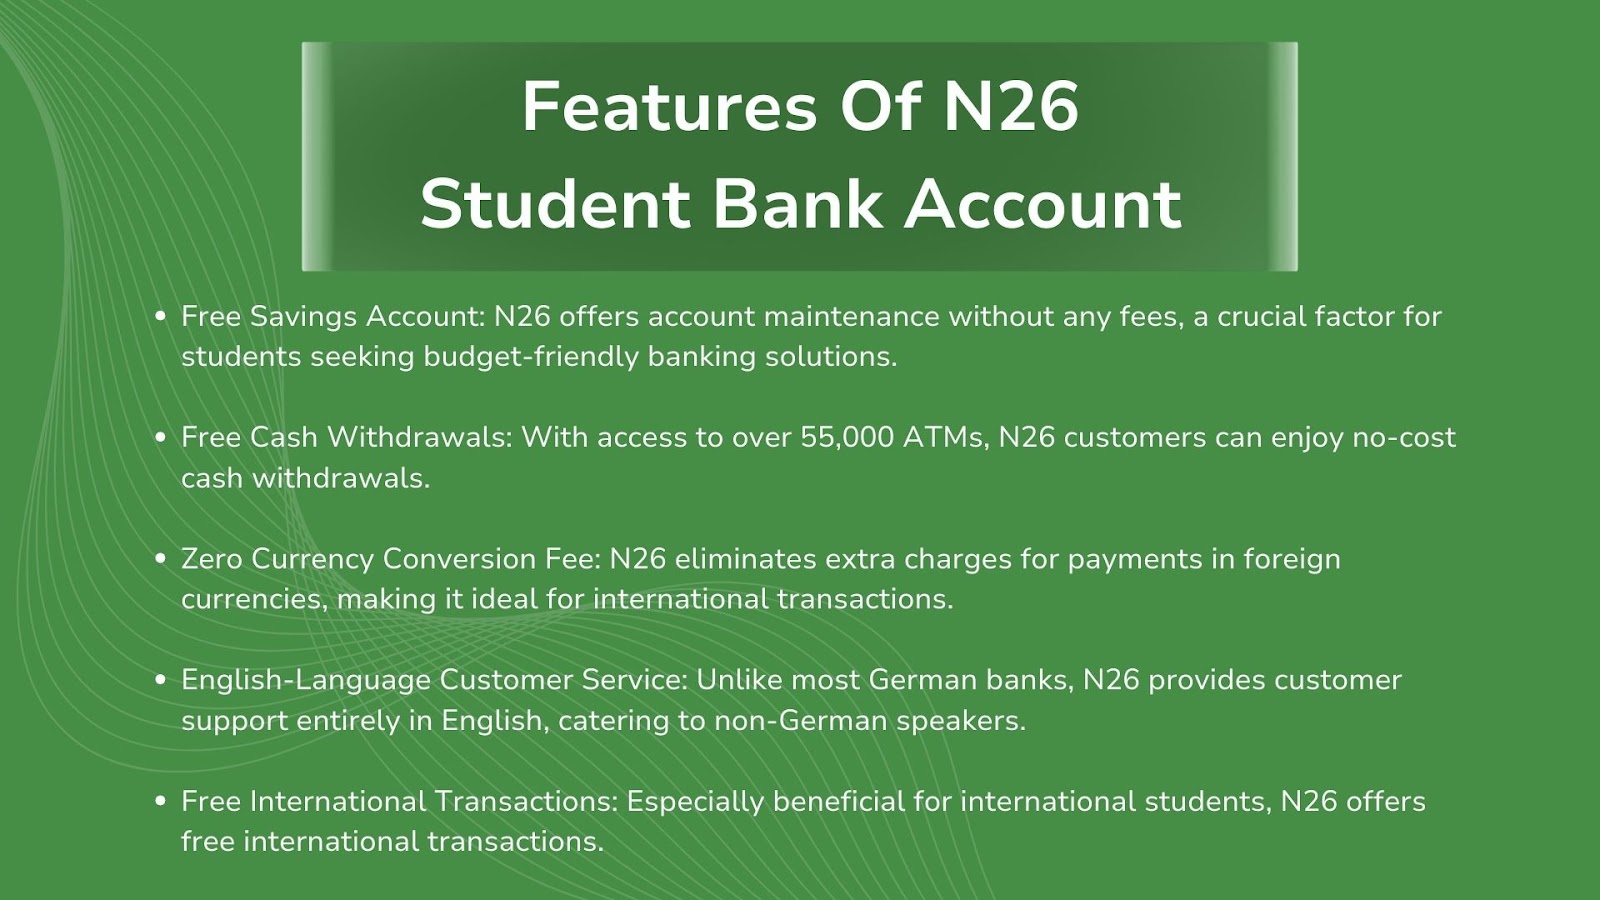 Features of German N26 student bank account